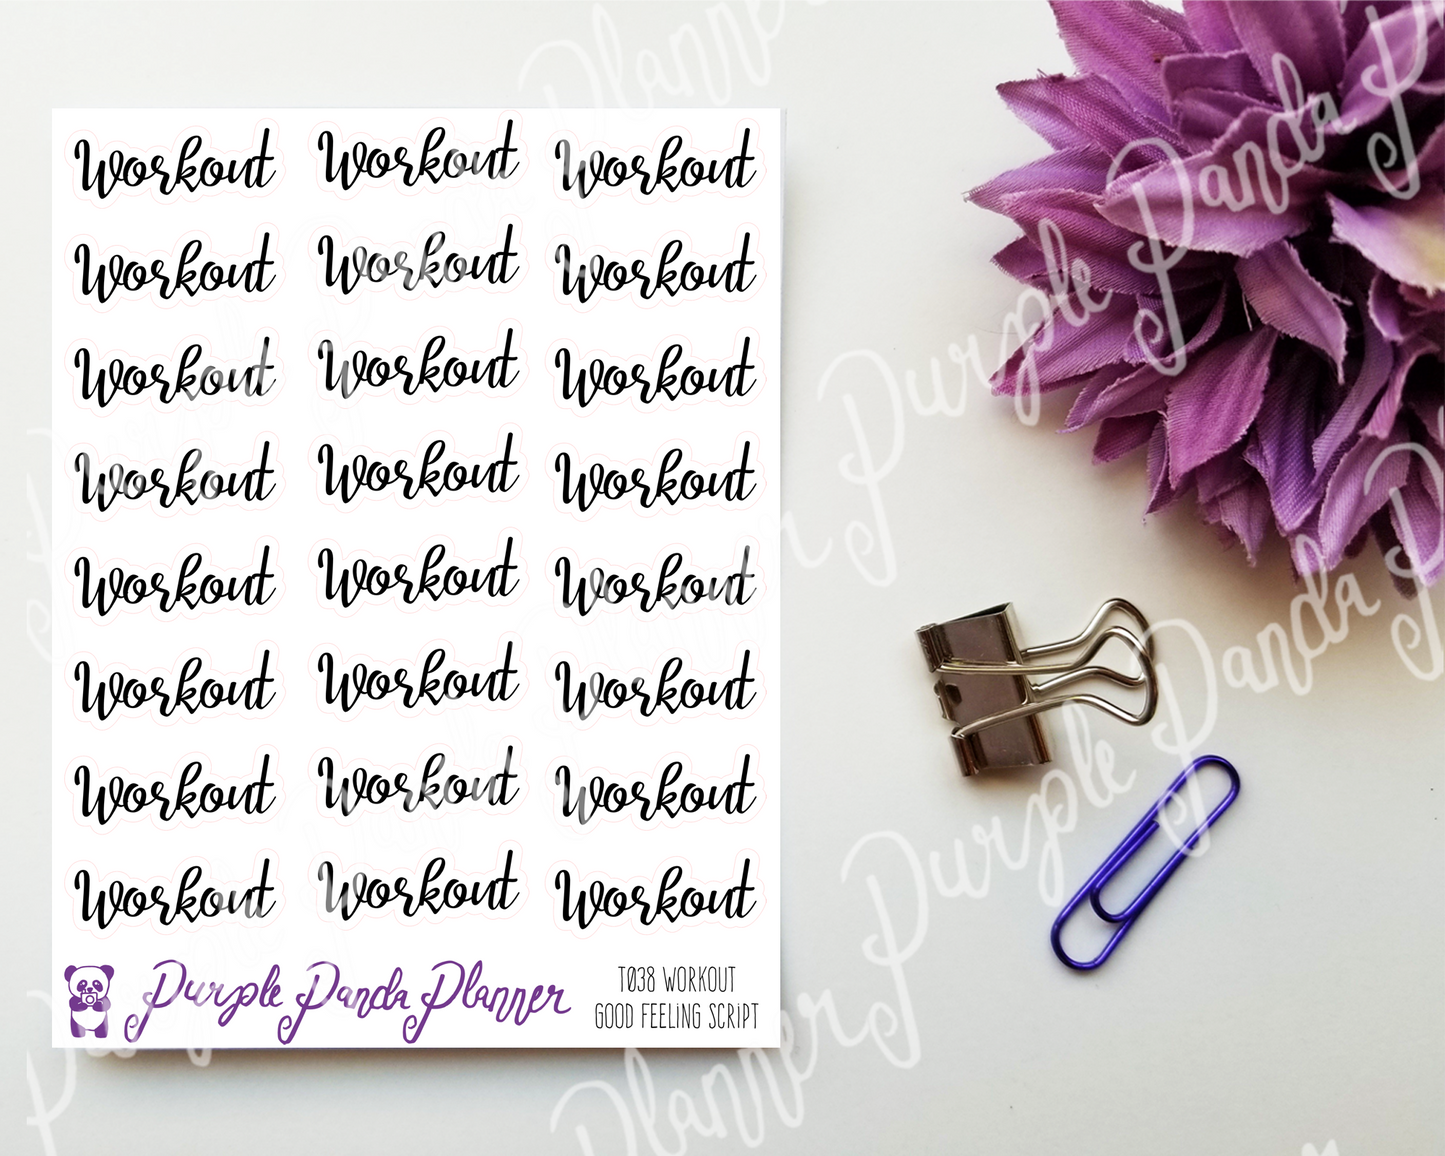 Workout - Good Feeling Script Stickers for Planner or Bullet Journal T038